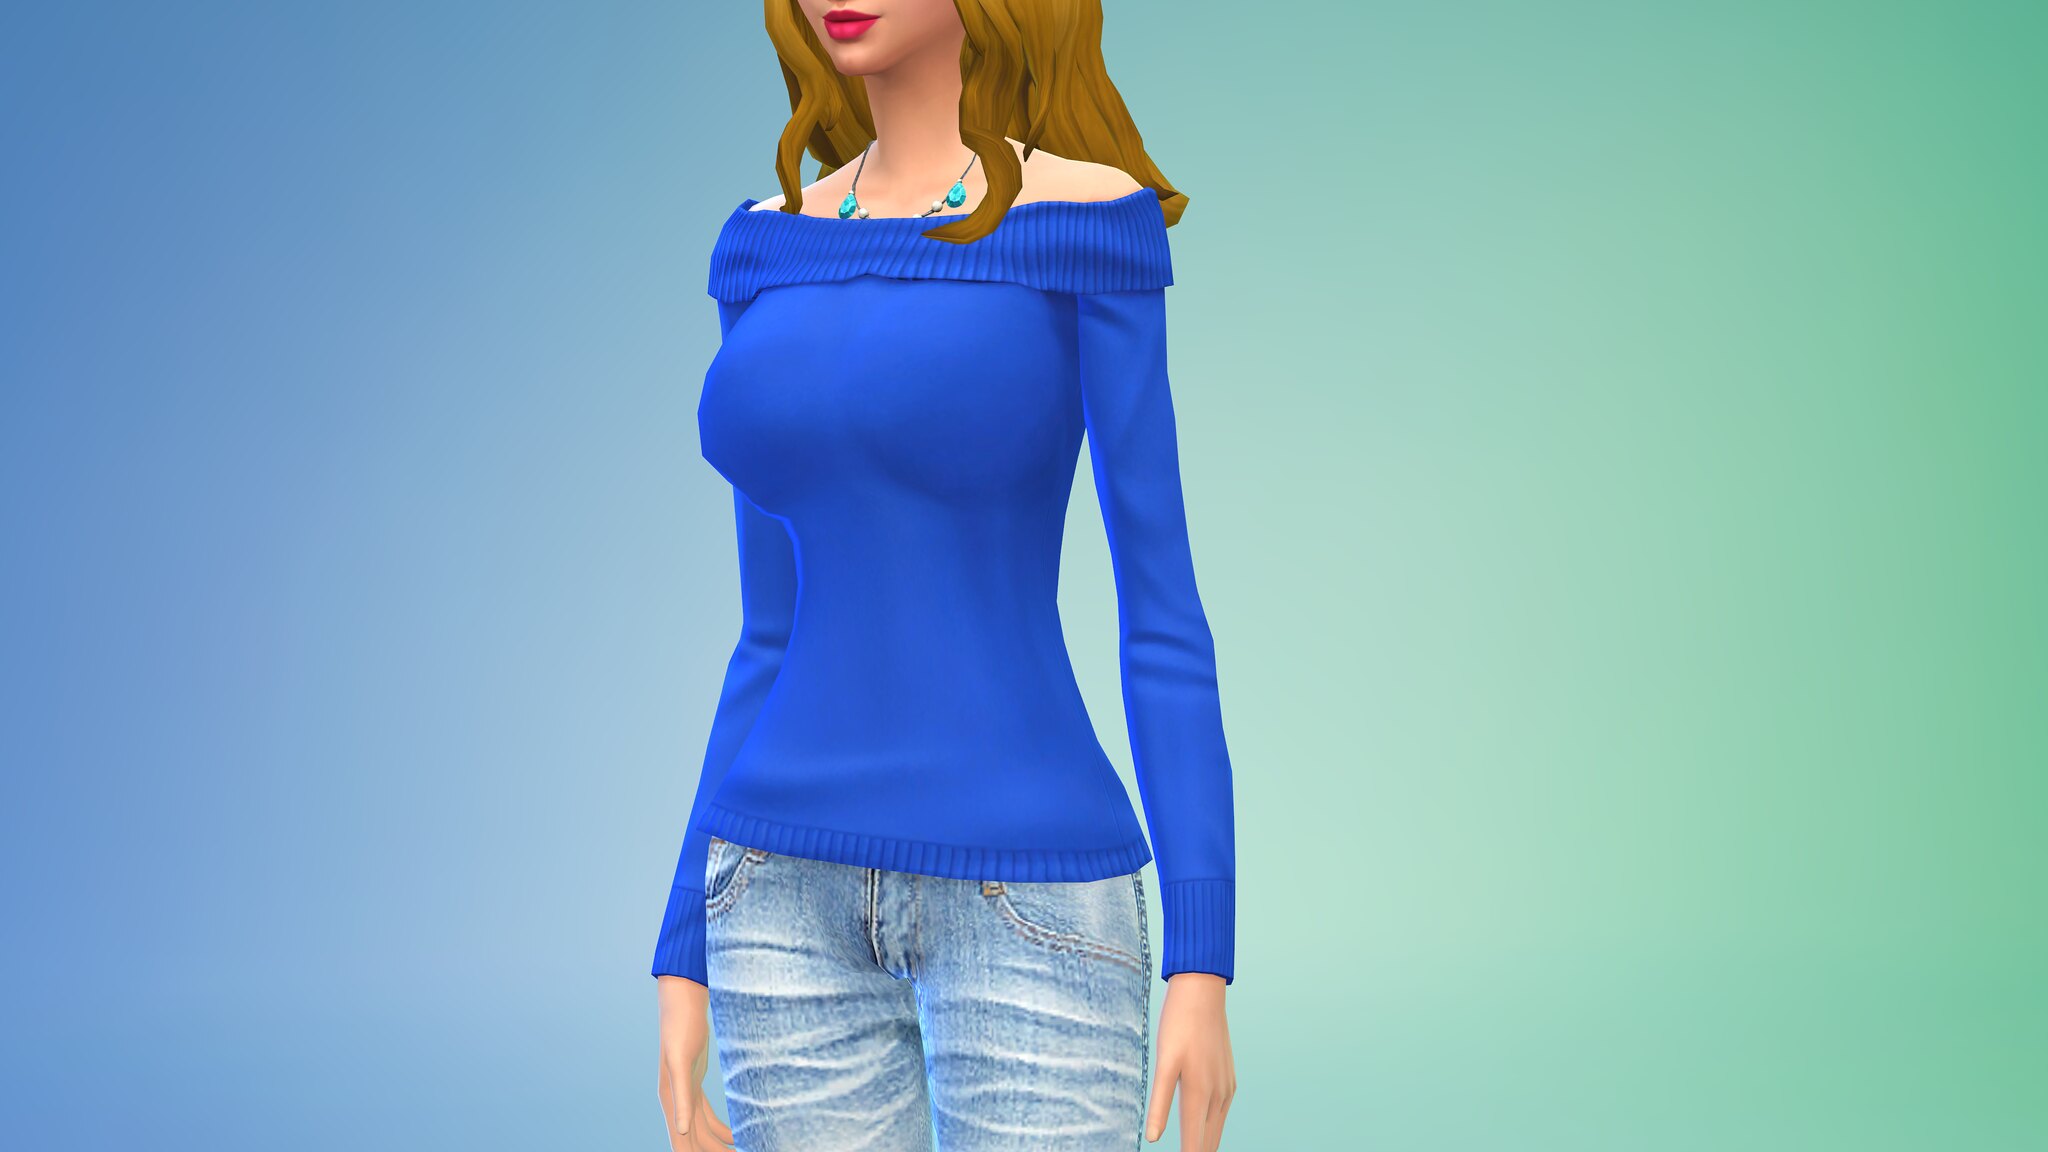 mod the sims 4 height